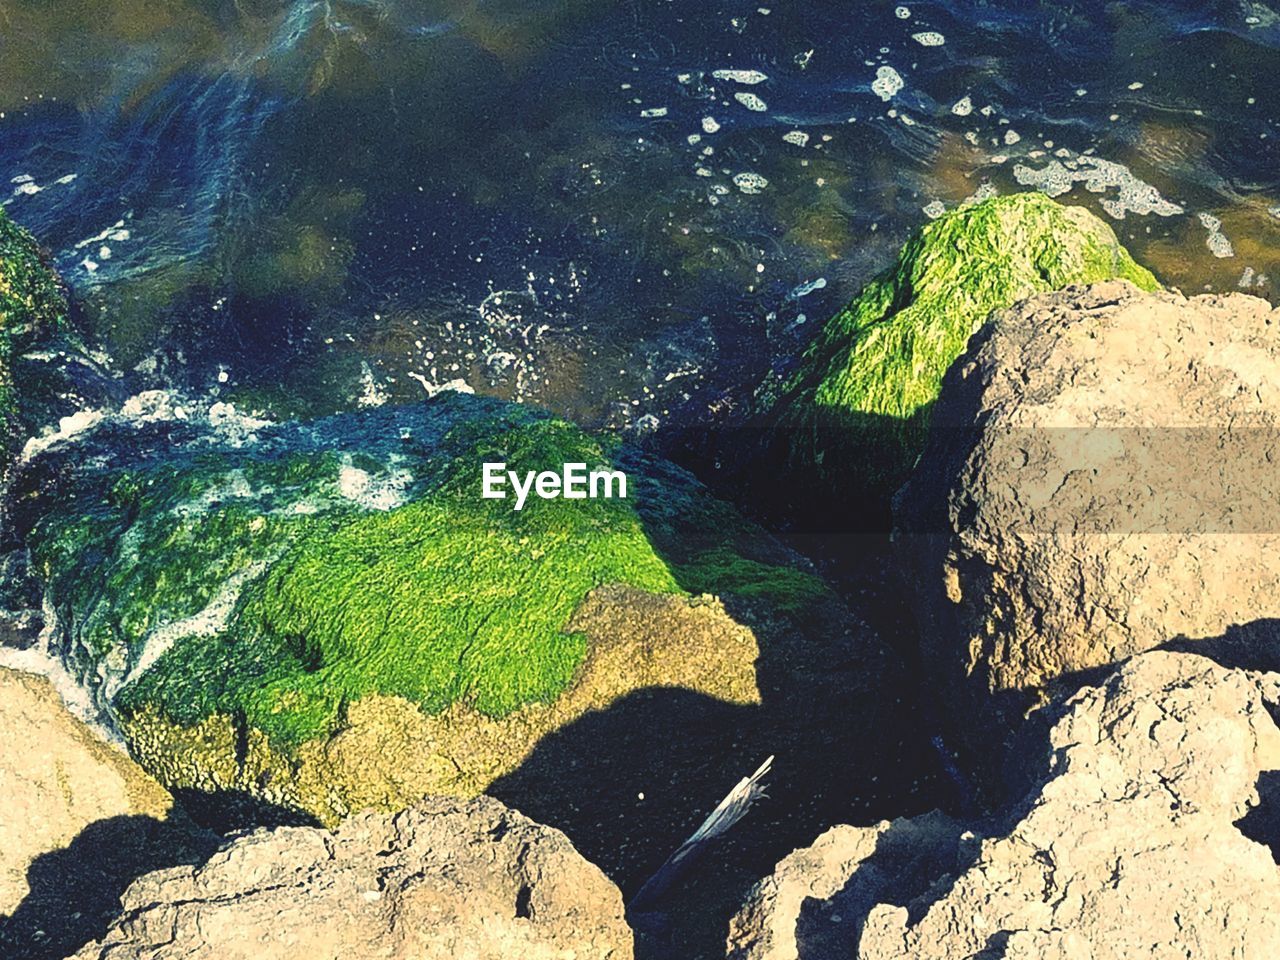 HIGH ANGLE VIEW OF ROCK AMIDST SEA